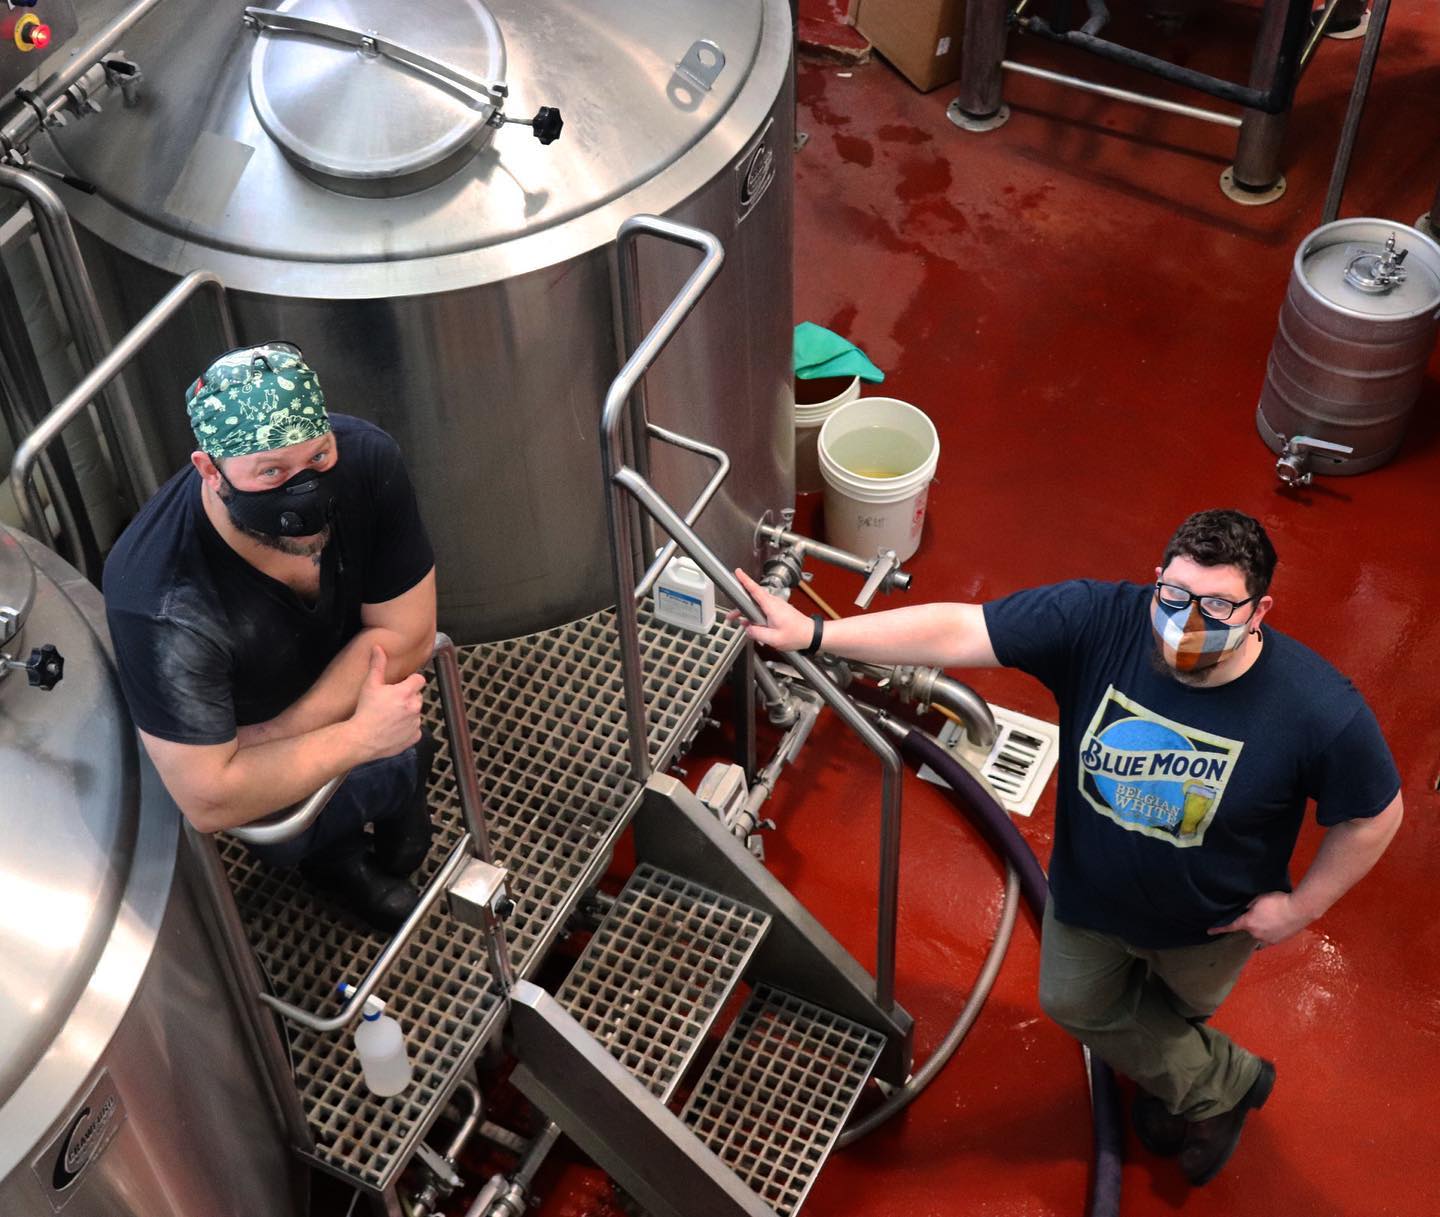 Two Brewers standing near brewing vessels at Pollyanna Brewing Company